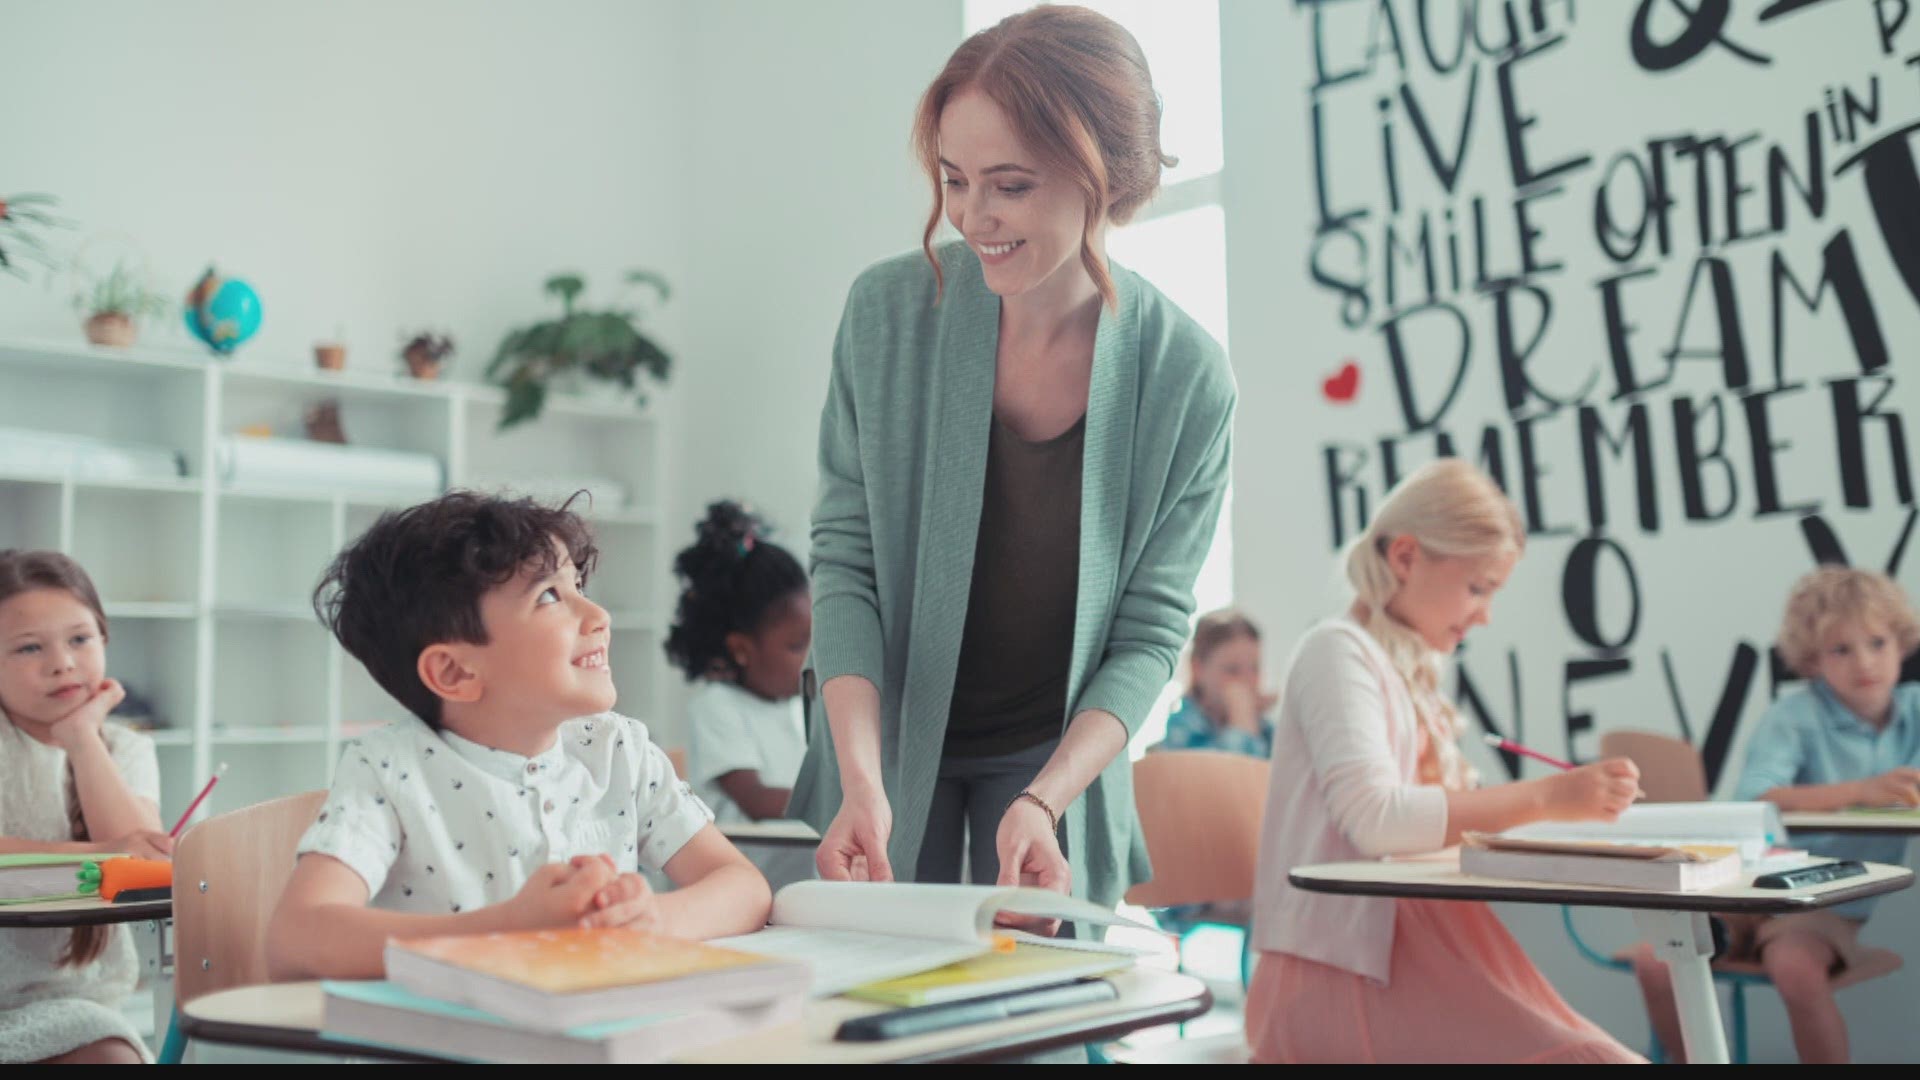 This is Teacher Appreciation Week and 13News Education Expert Jennifer Brinker shared her thoughts on some ways to thank your kids' teachers.